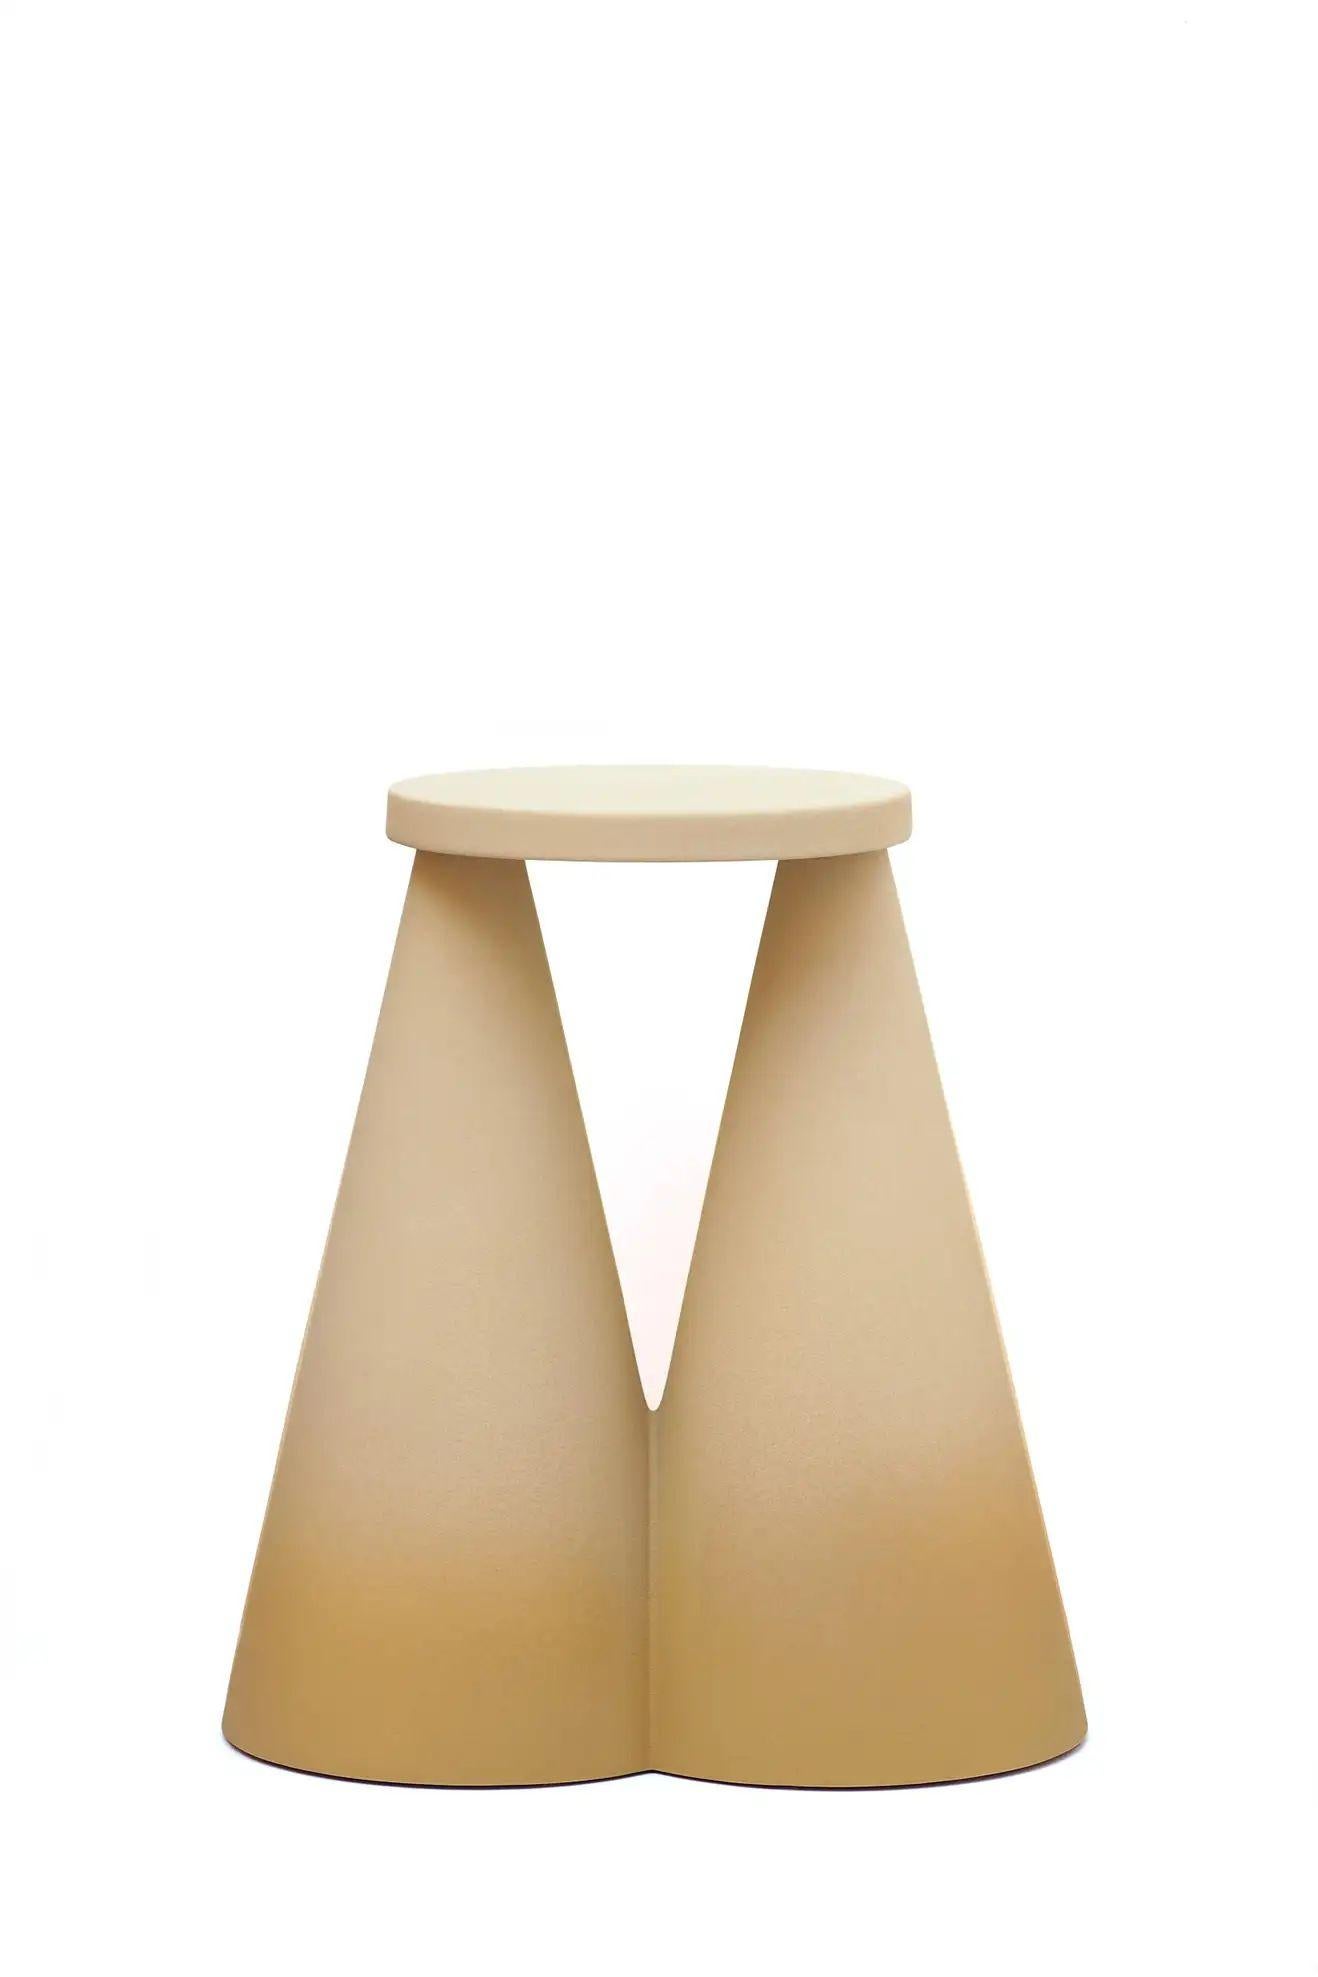 Pair of Isola Side Table by Cara Davide 11